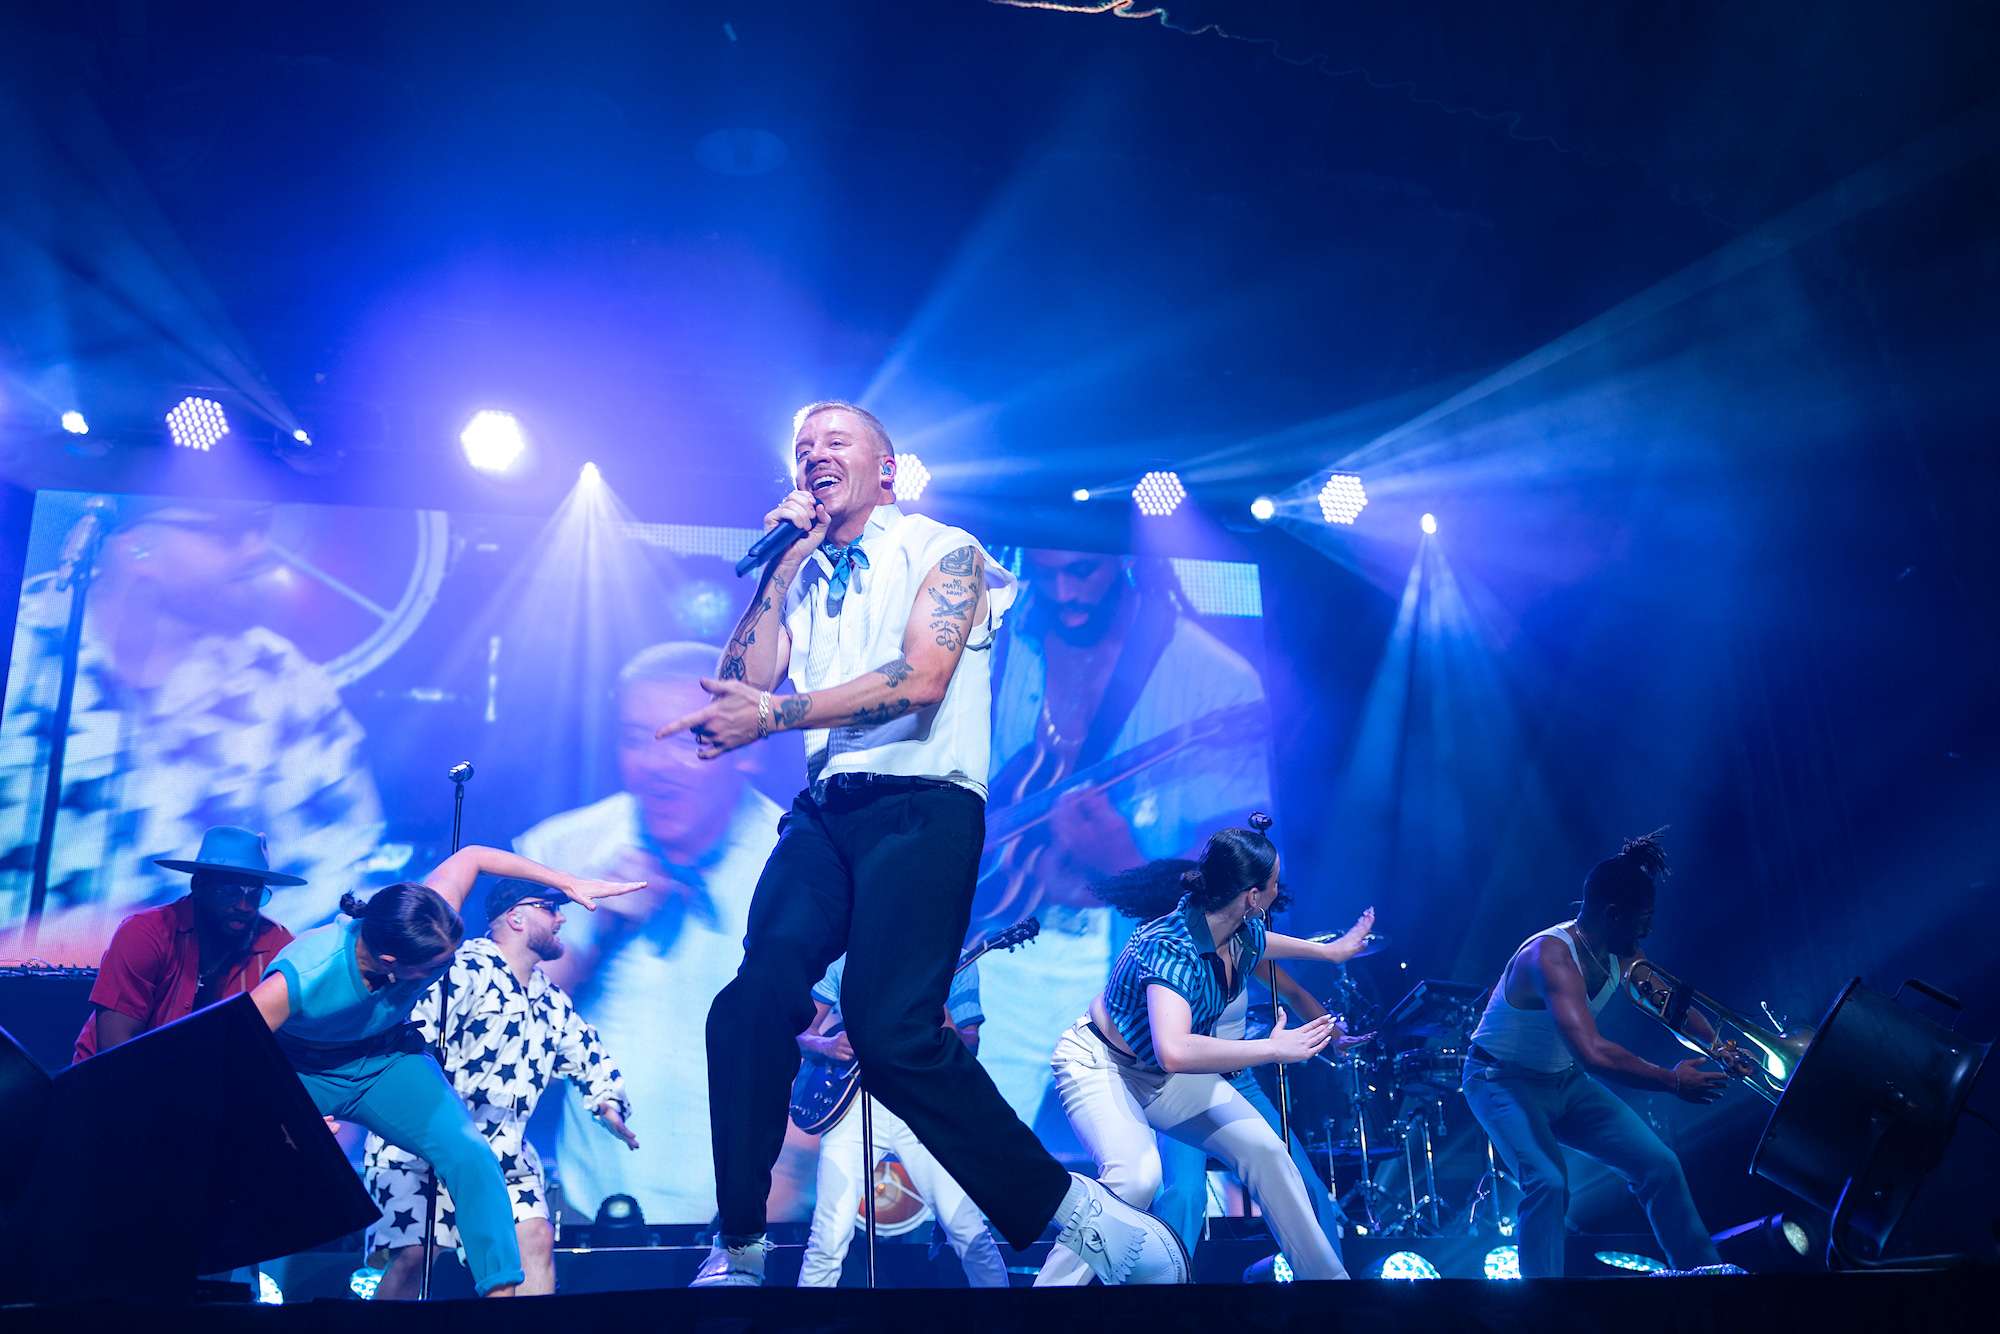 Macklemore's High-Energy Concert Leaves Chicago Wanting More 10